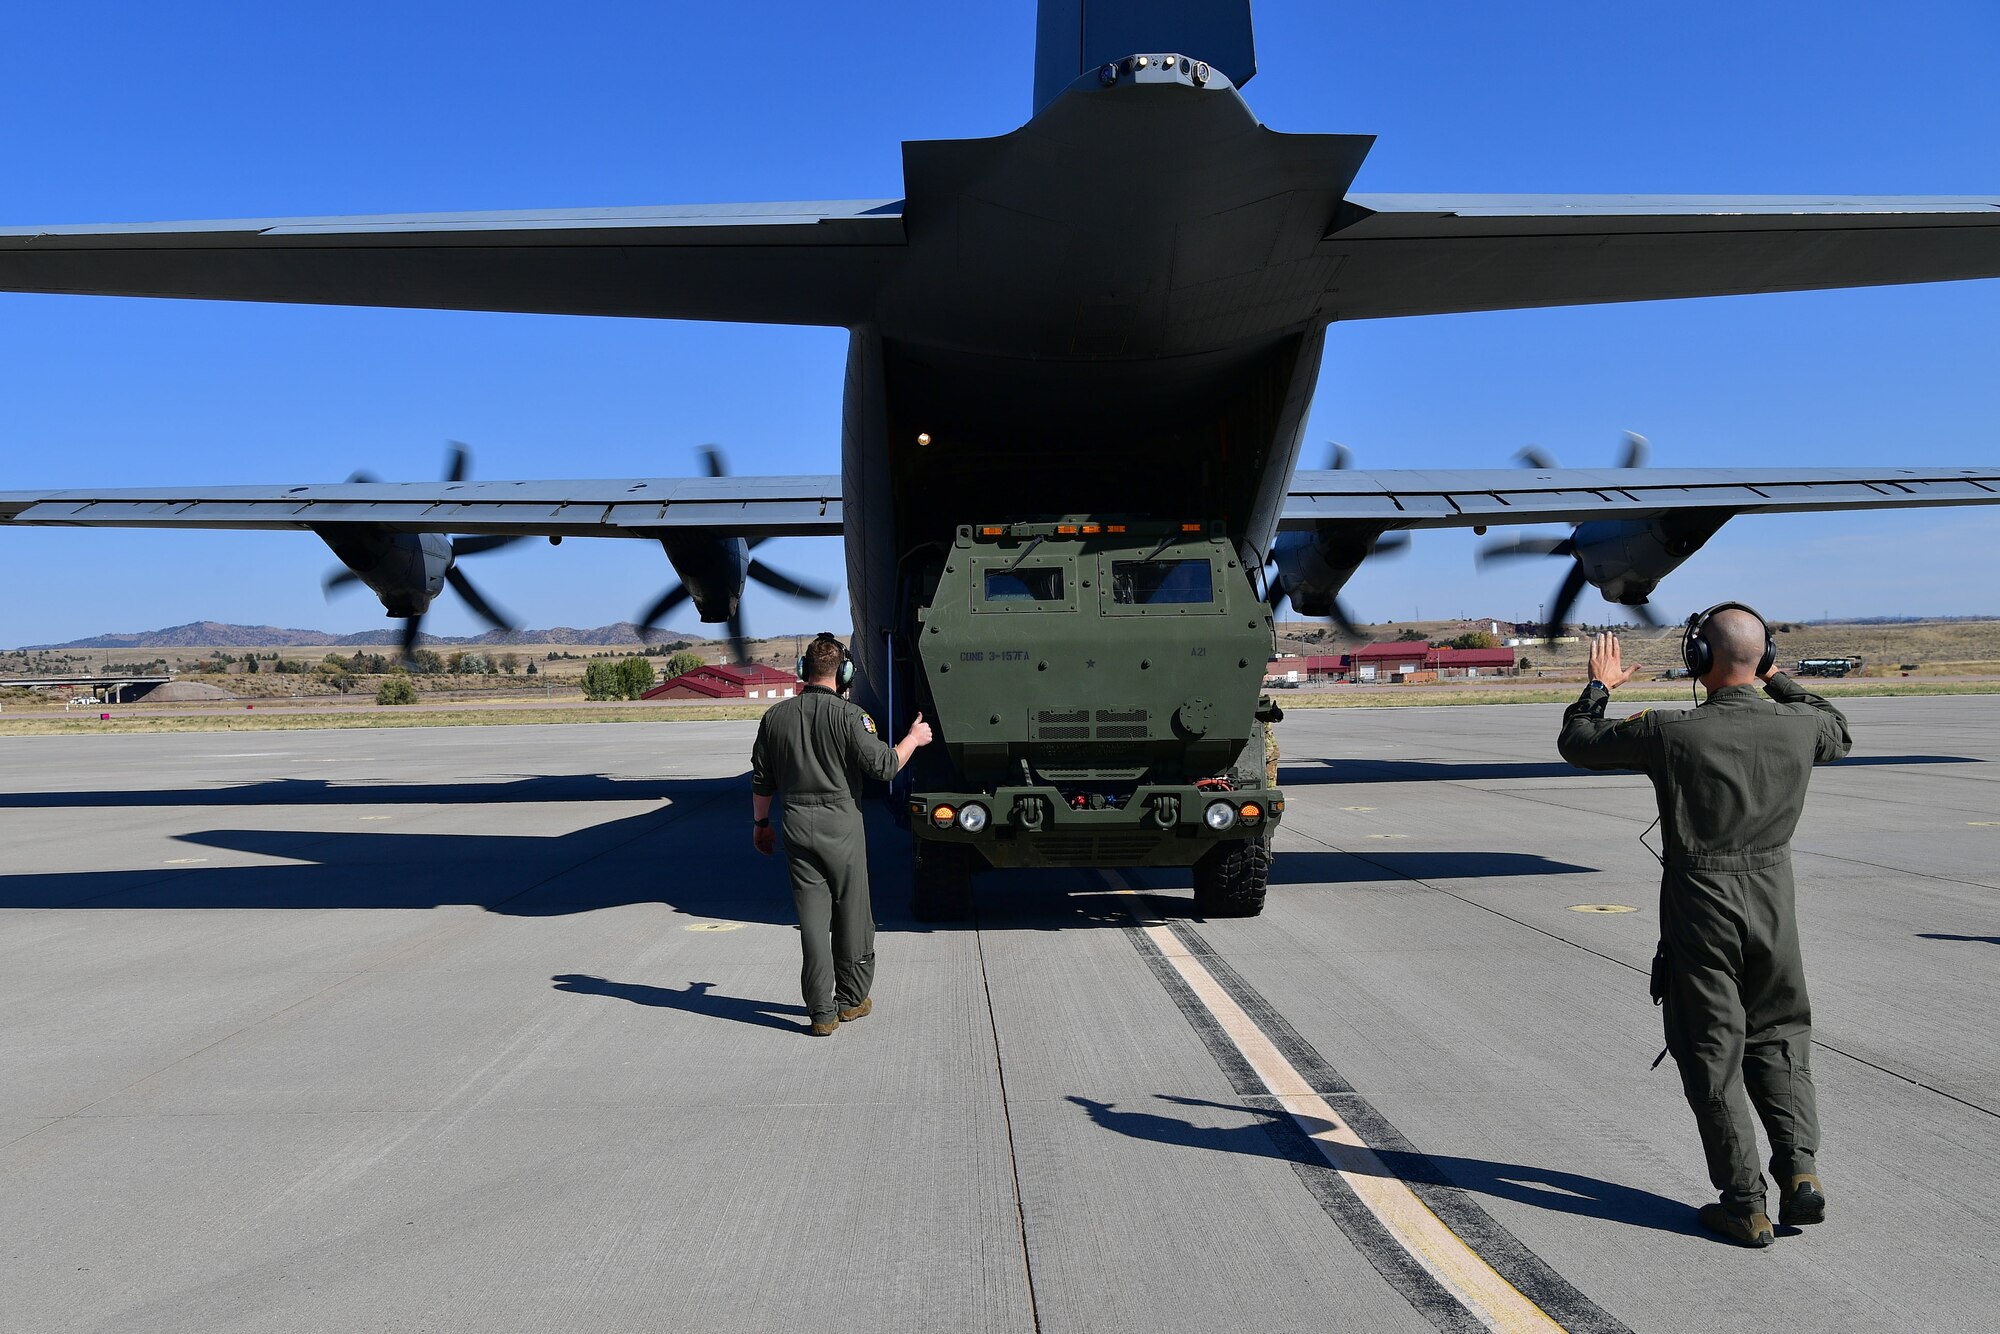 Loadmasters guide a HIMARS onto a C-130.